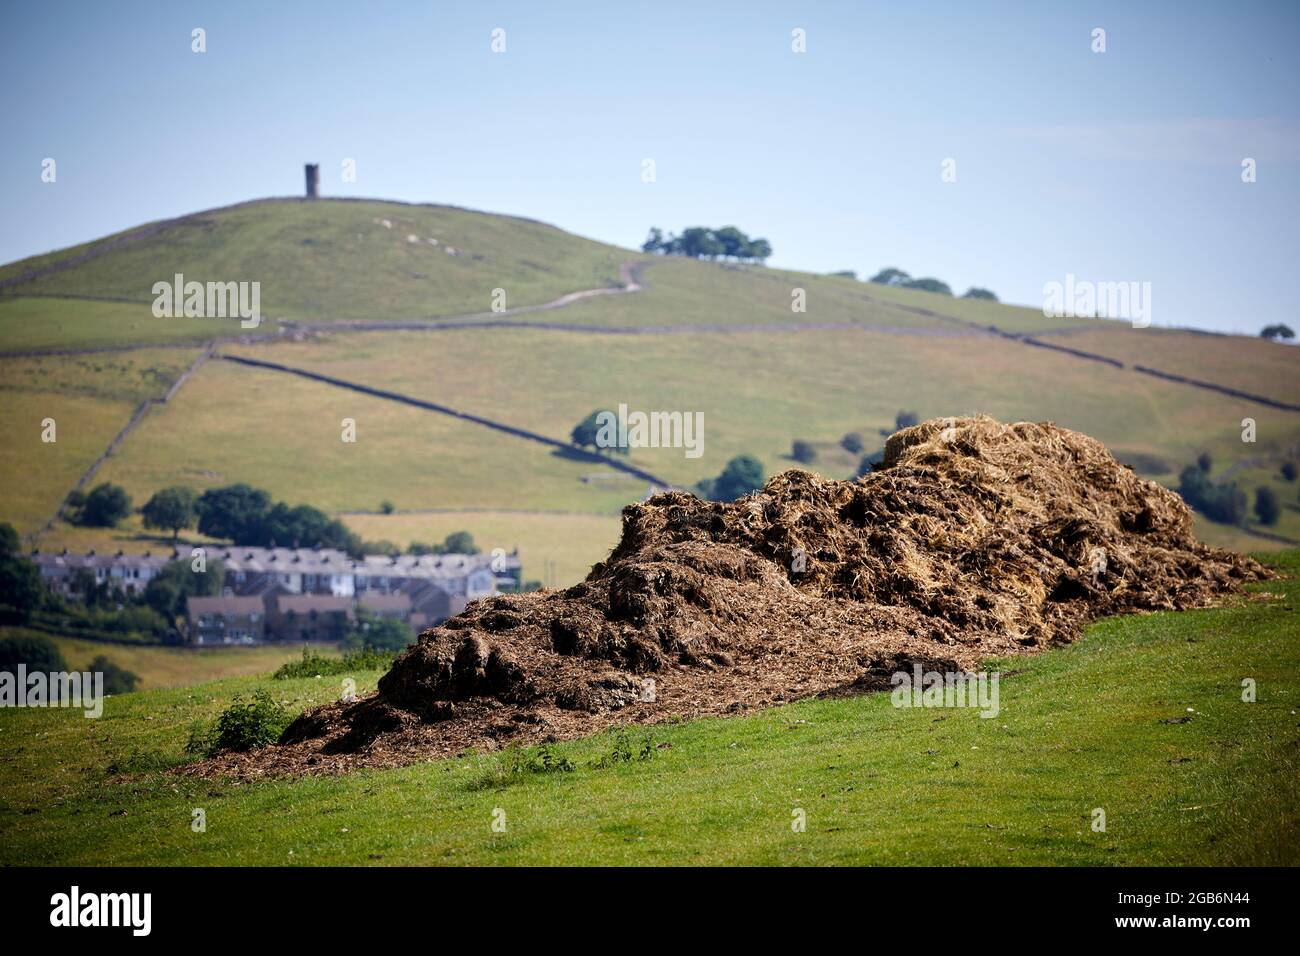 The countryside around Barrowford village in Lancashire, a pile of dry manure in a field Stock Photo